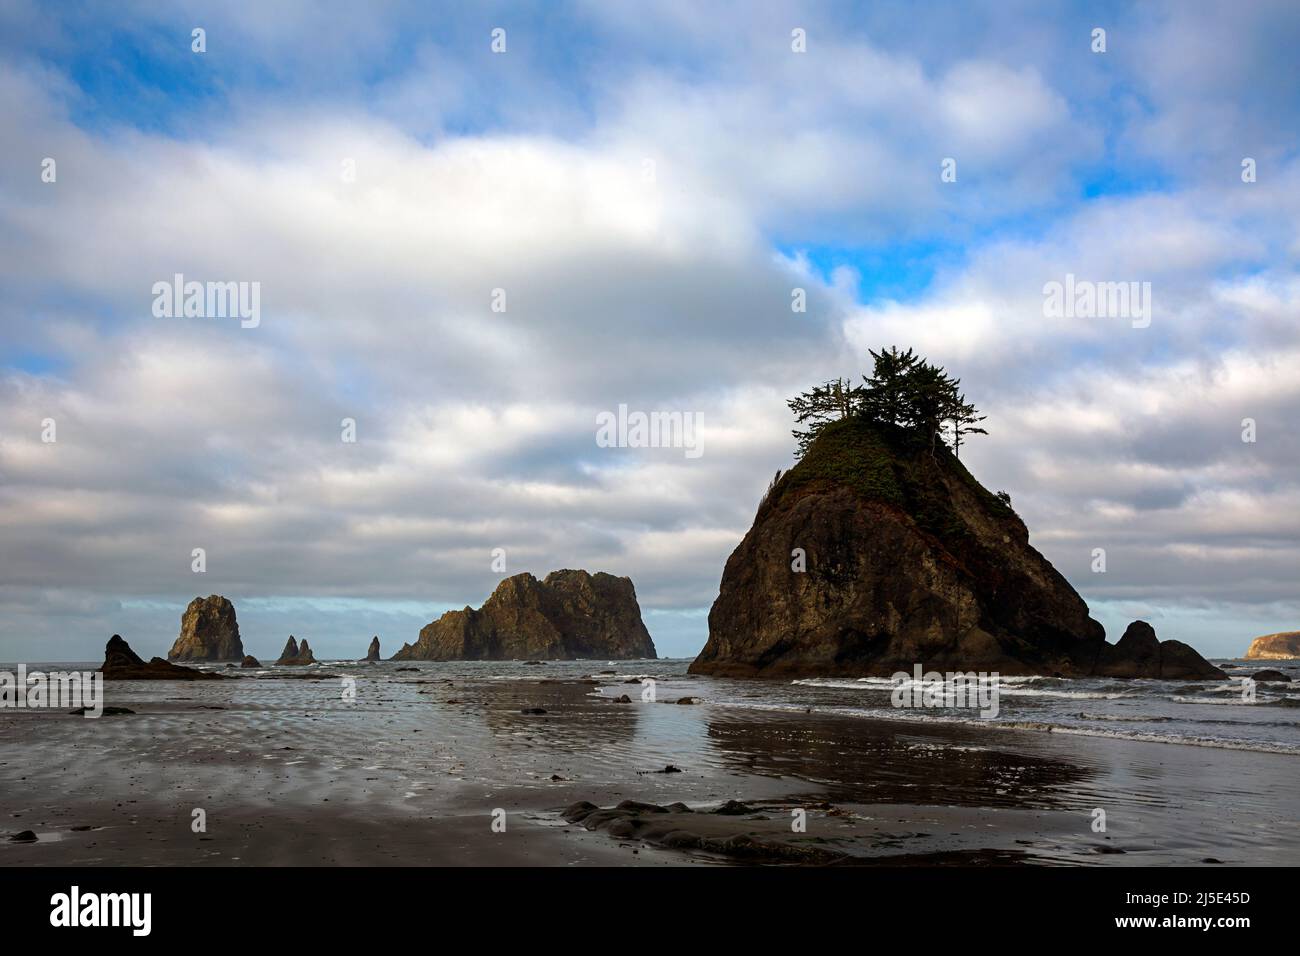 Wa21415-00...WASHINGTON - Sea stacks and off shore islands along the North Olympic Coast section of Olympic National Park. Stock Photo